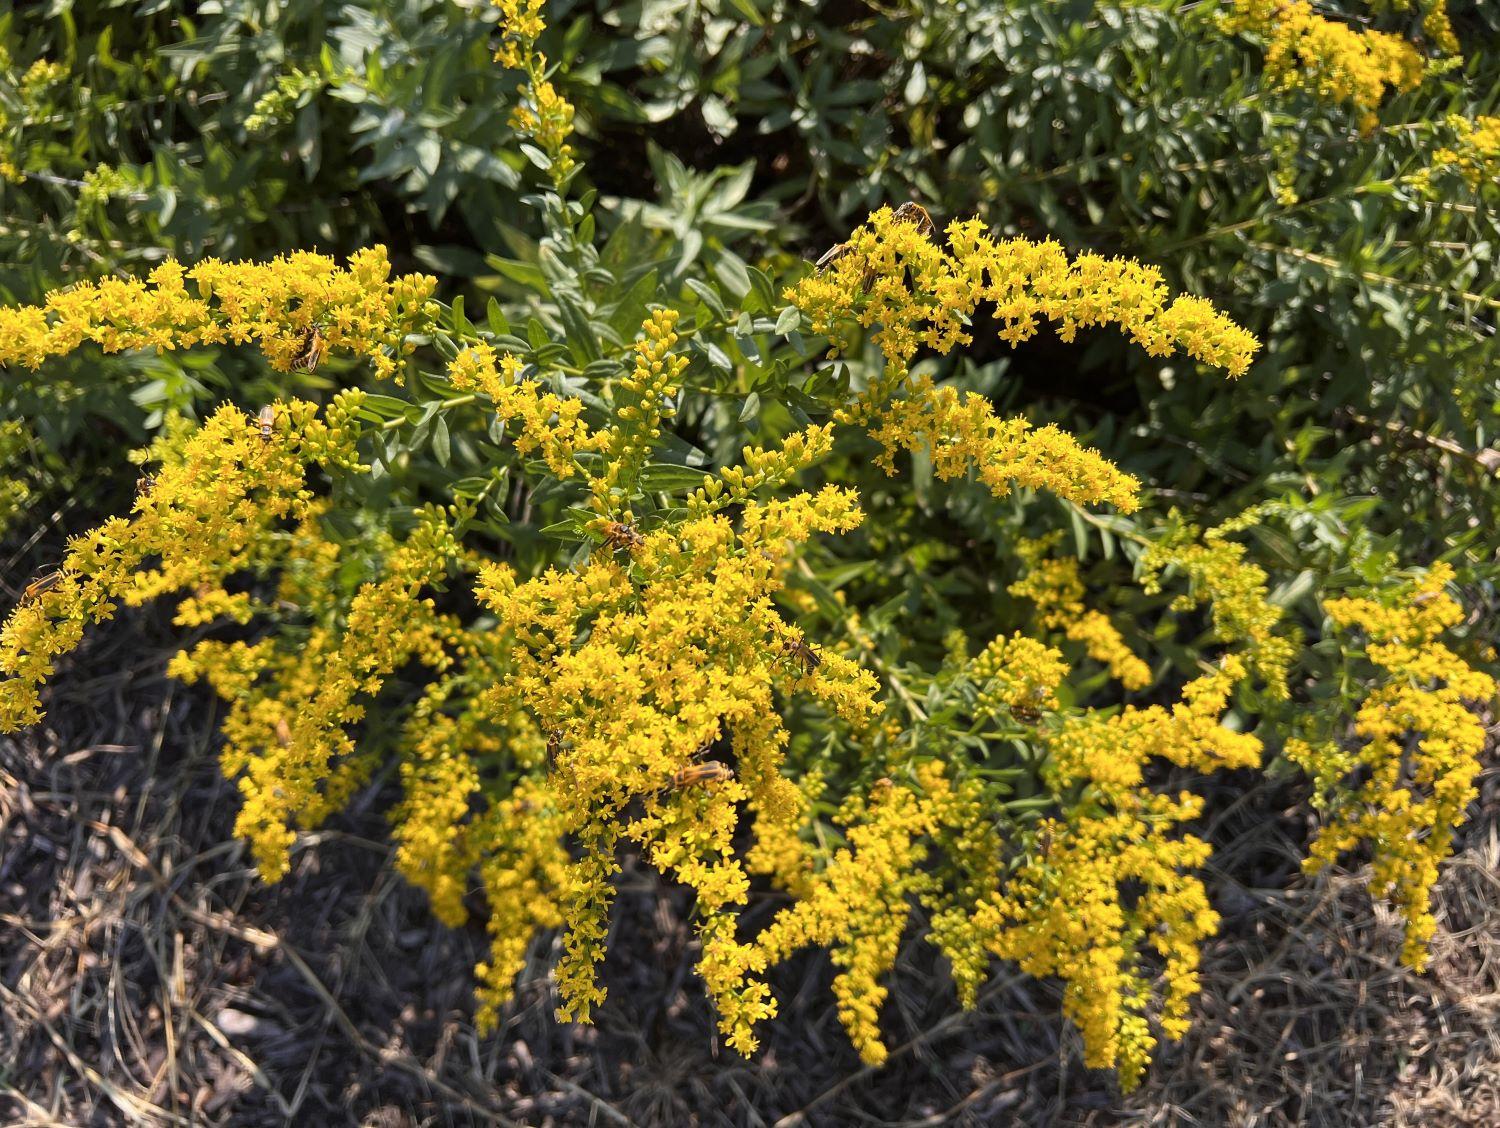 a spray of yellow flowers - fireworks goldenrod